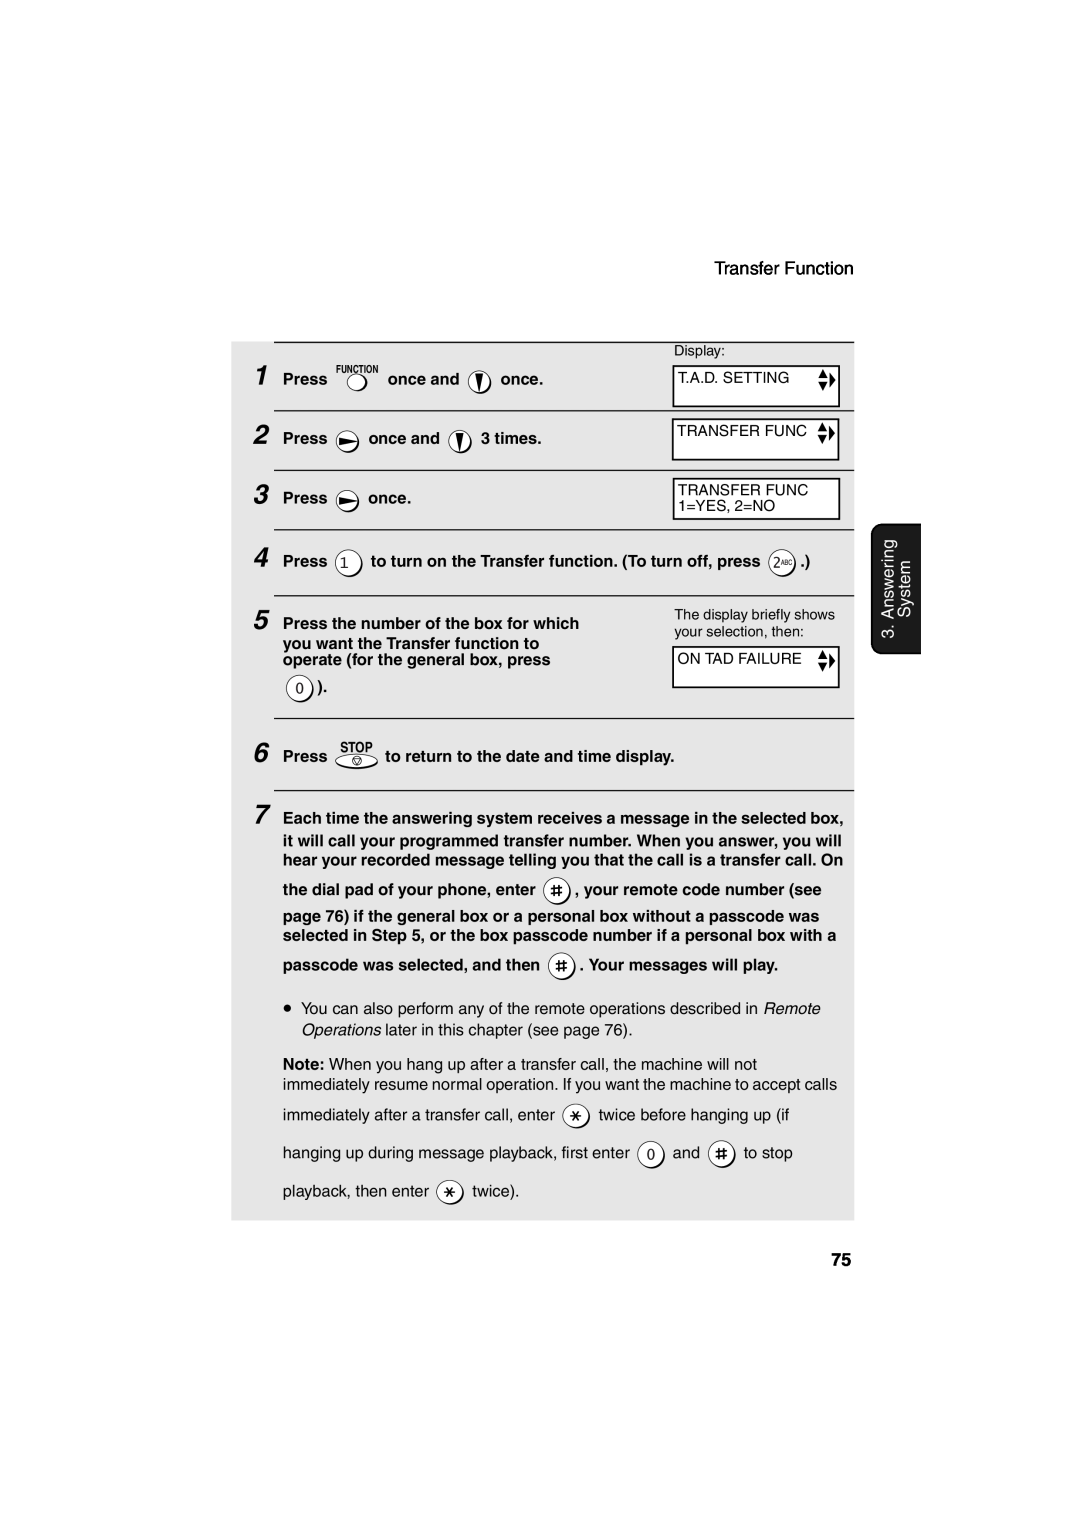 Sharp UX-CD600 operation manual Answering, System, immediately after a transfer call, enter twice before hanging up if 